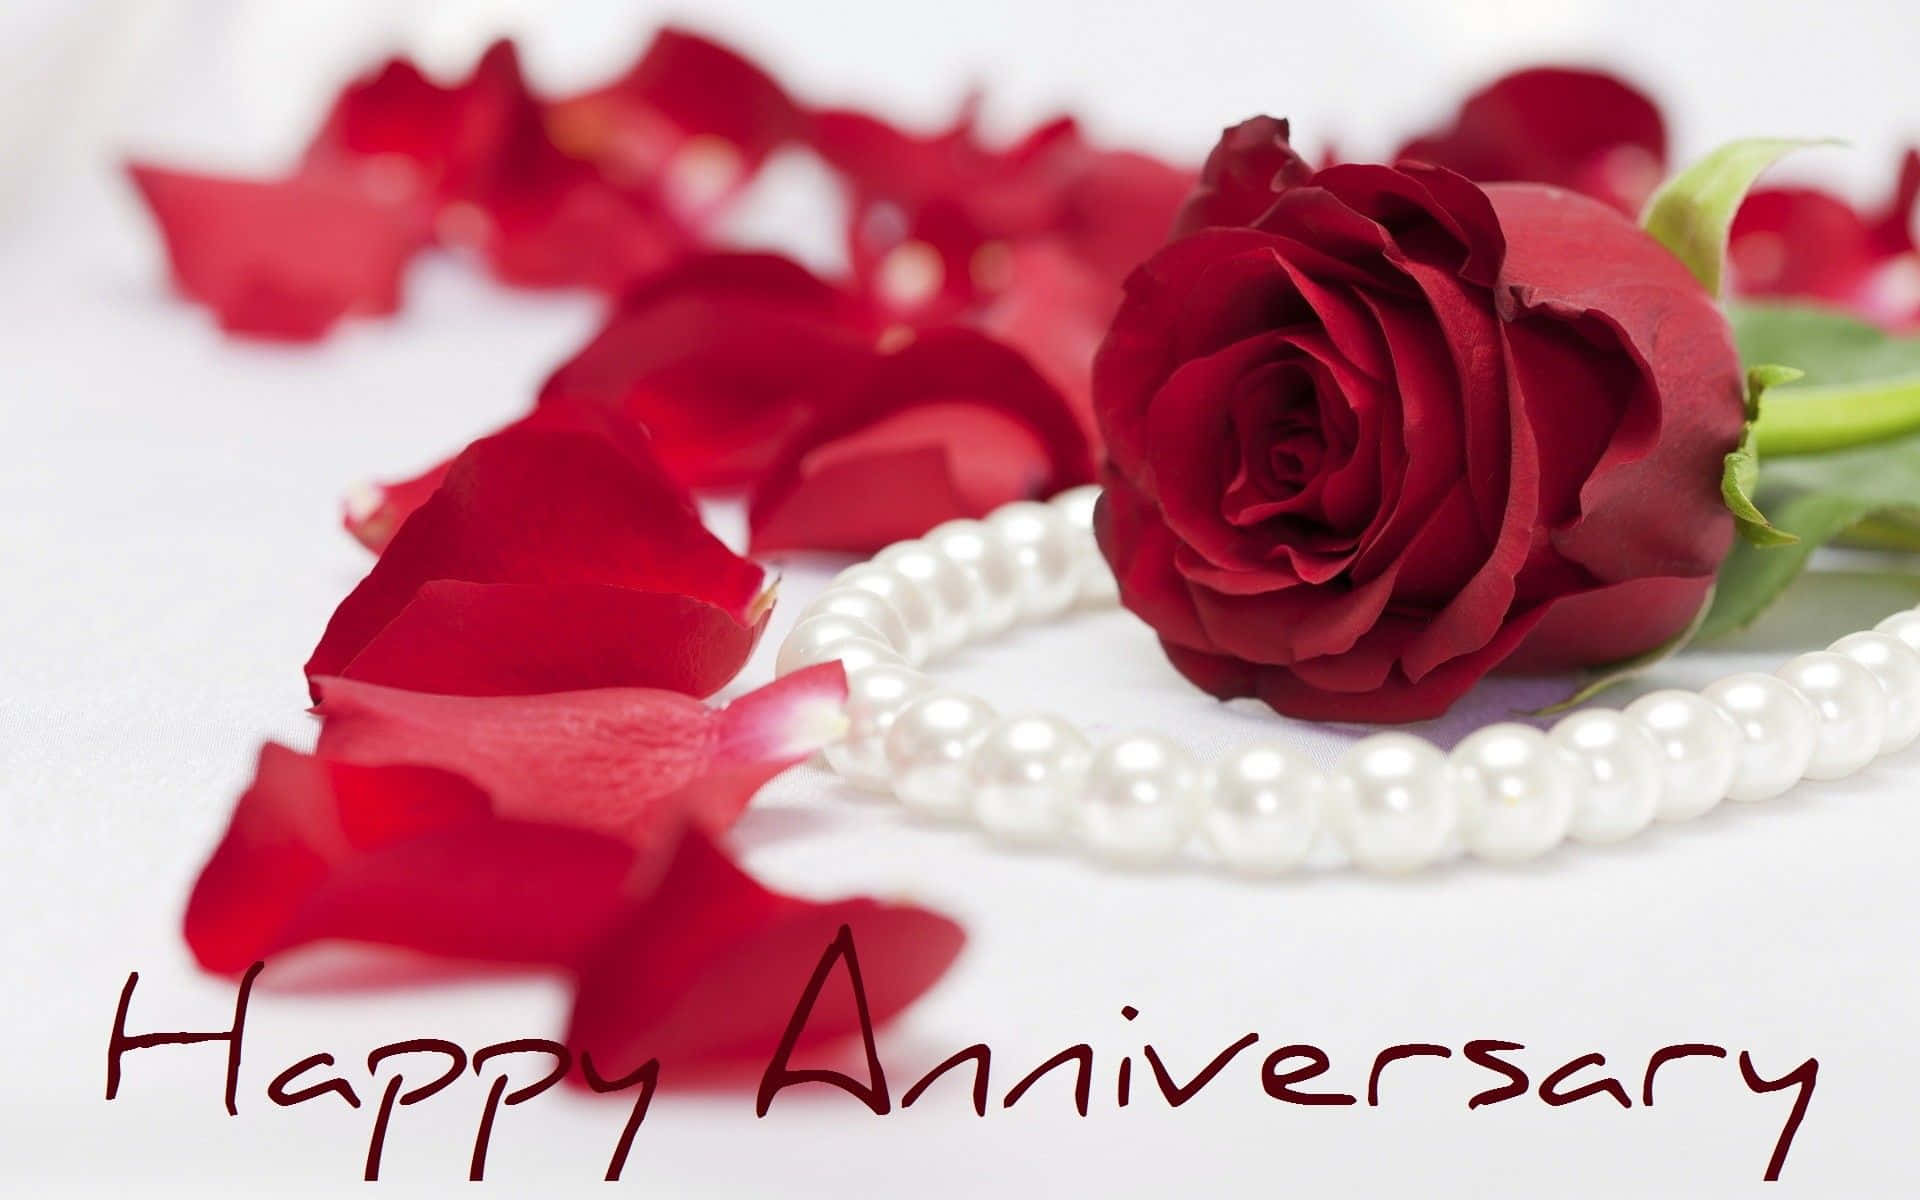 Give your celebration a special touch with this Happy Anniversary background